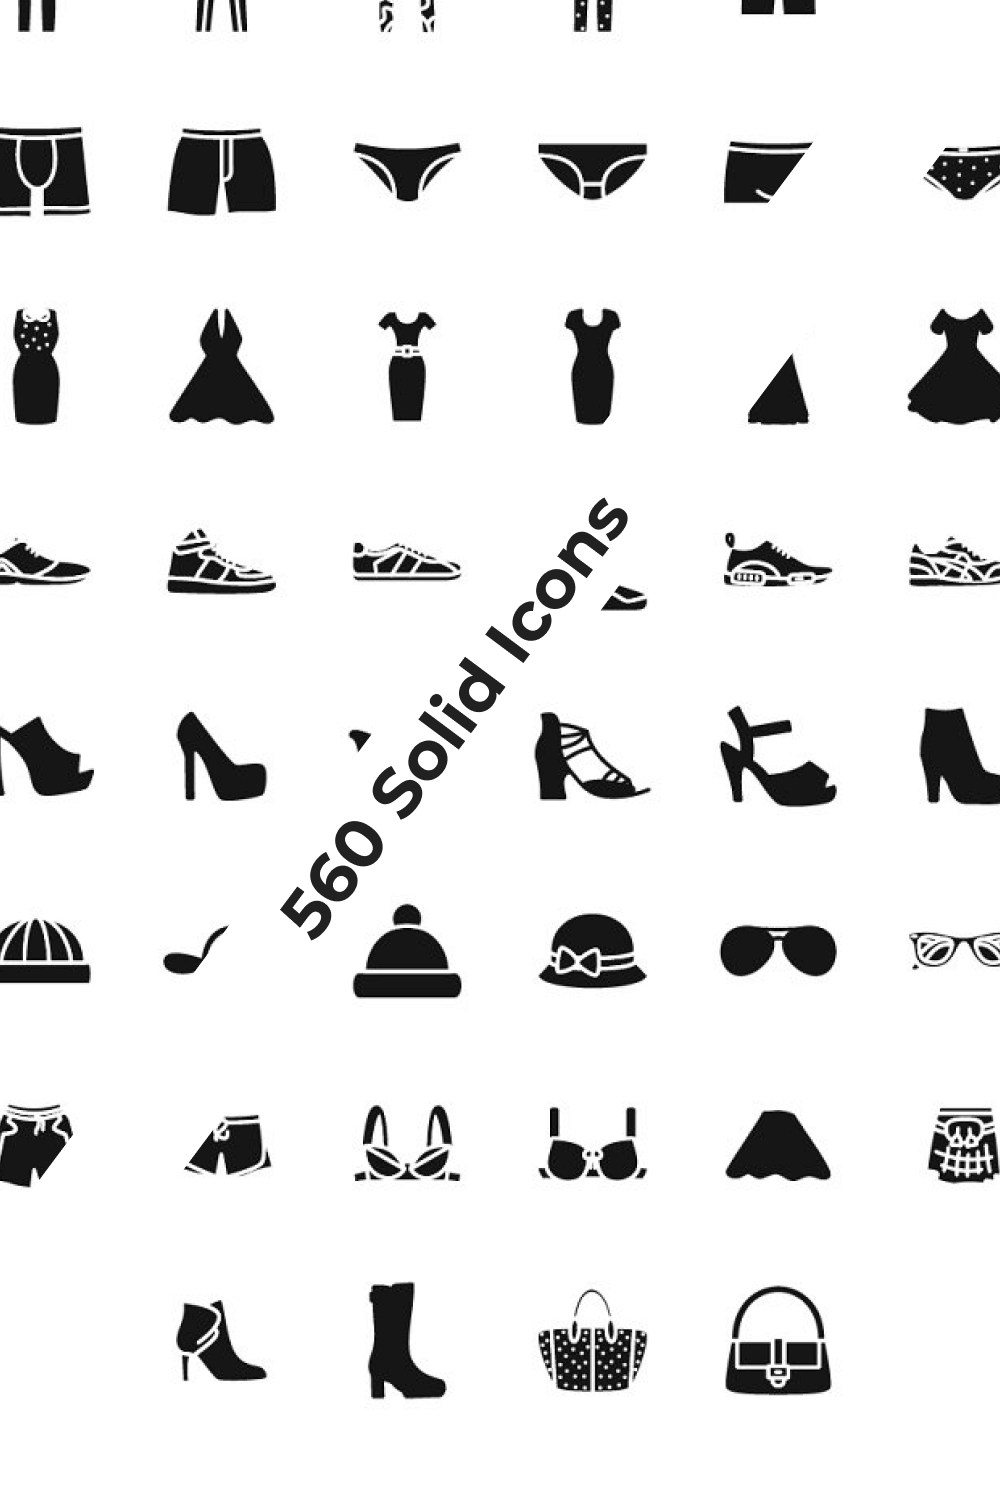 560 solid icons of clothes.